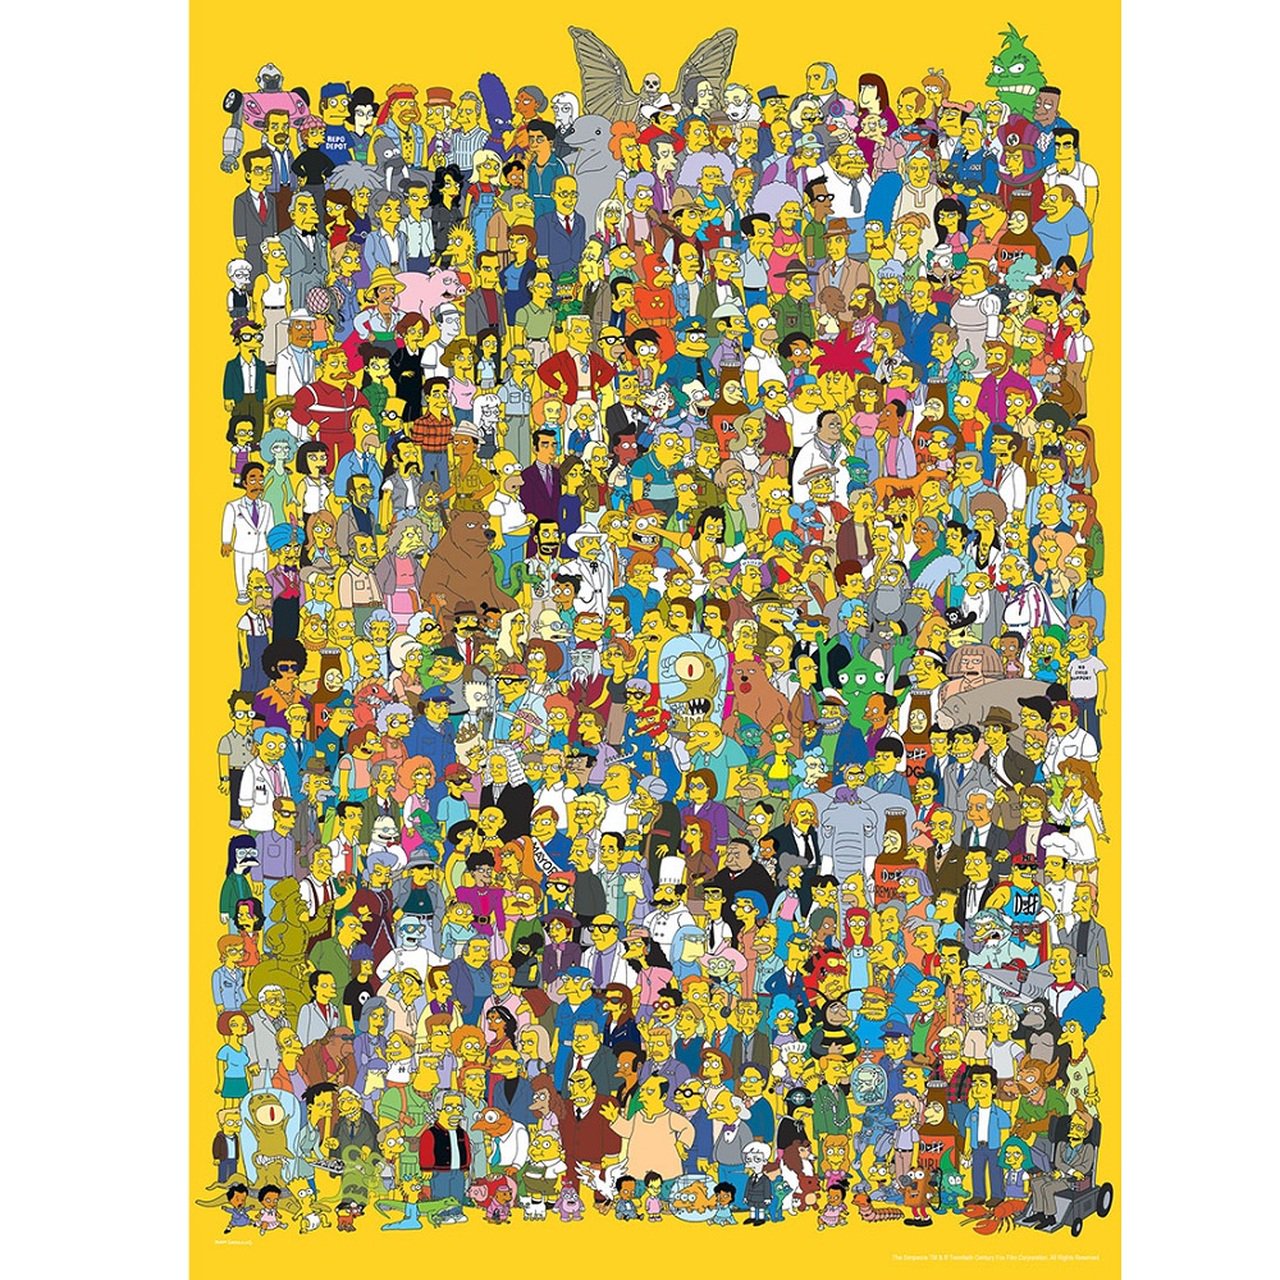 The Simpsons “Cast of Thousands” 1000 pc